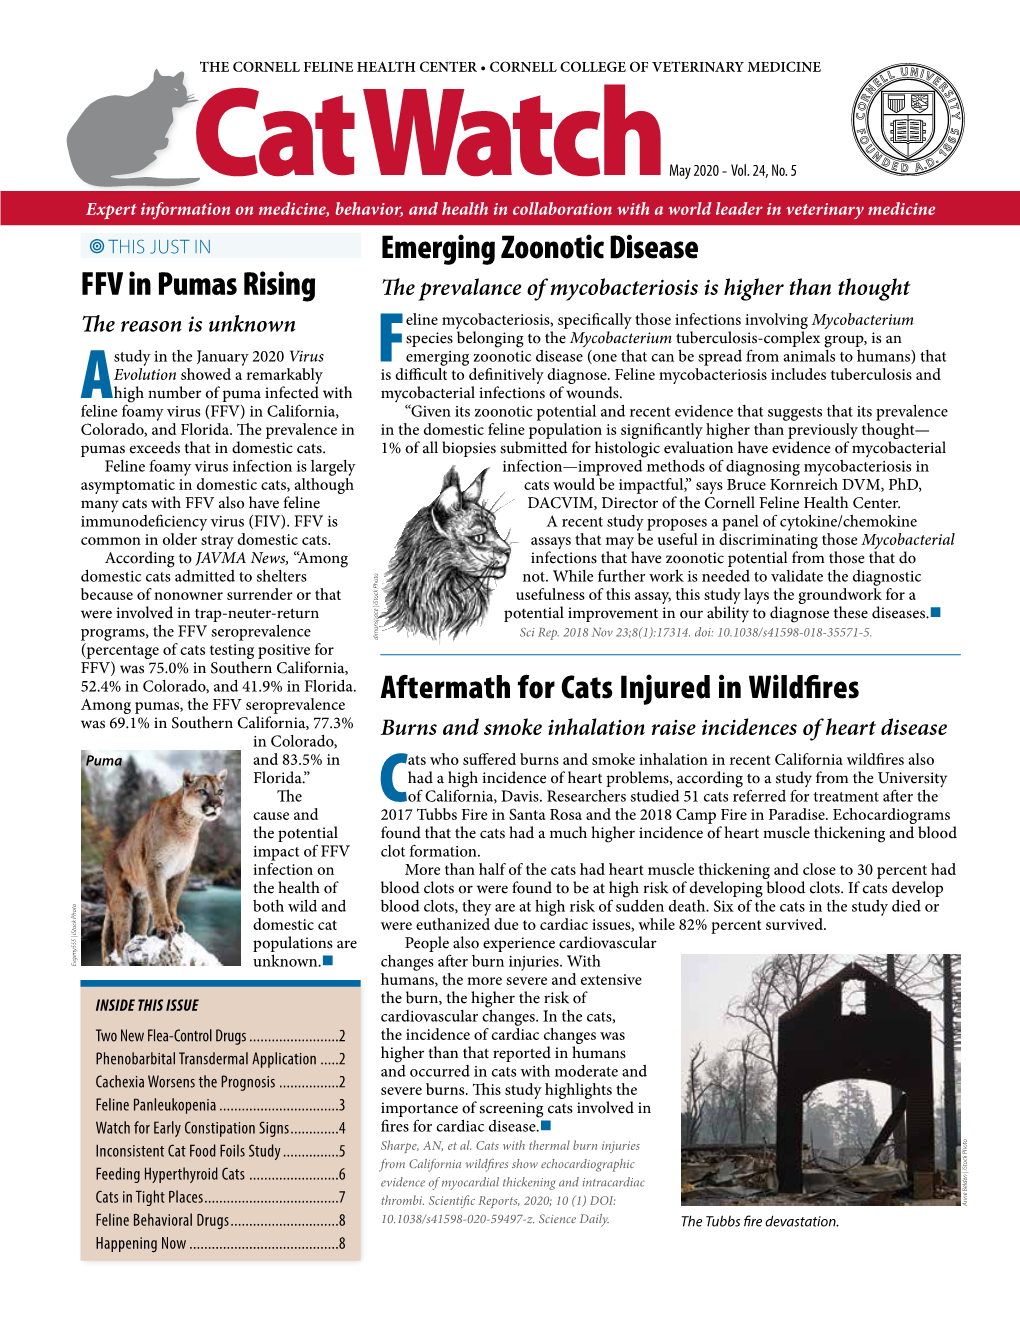 Catwatch January 2018 V22 N1